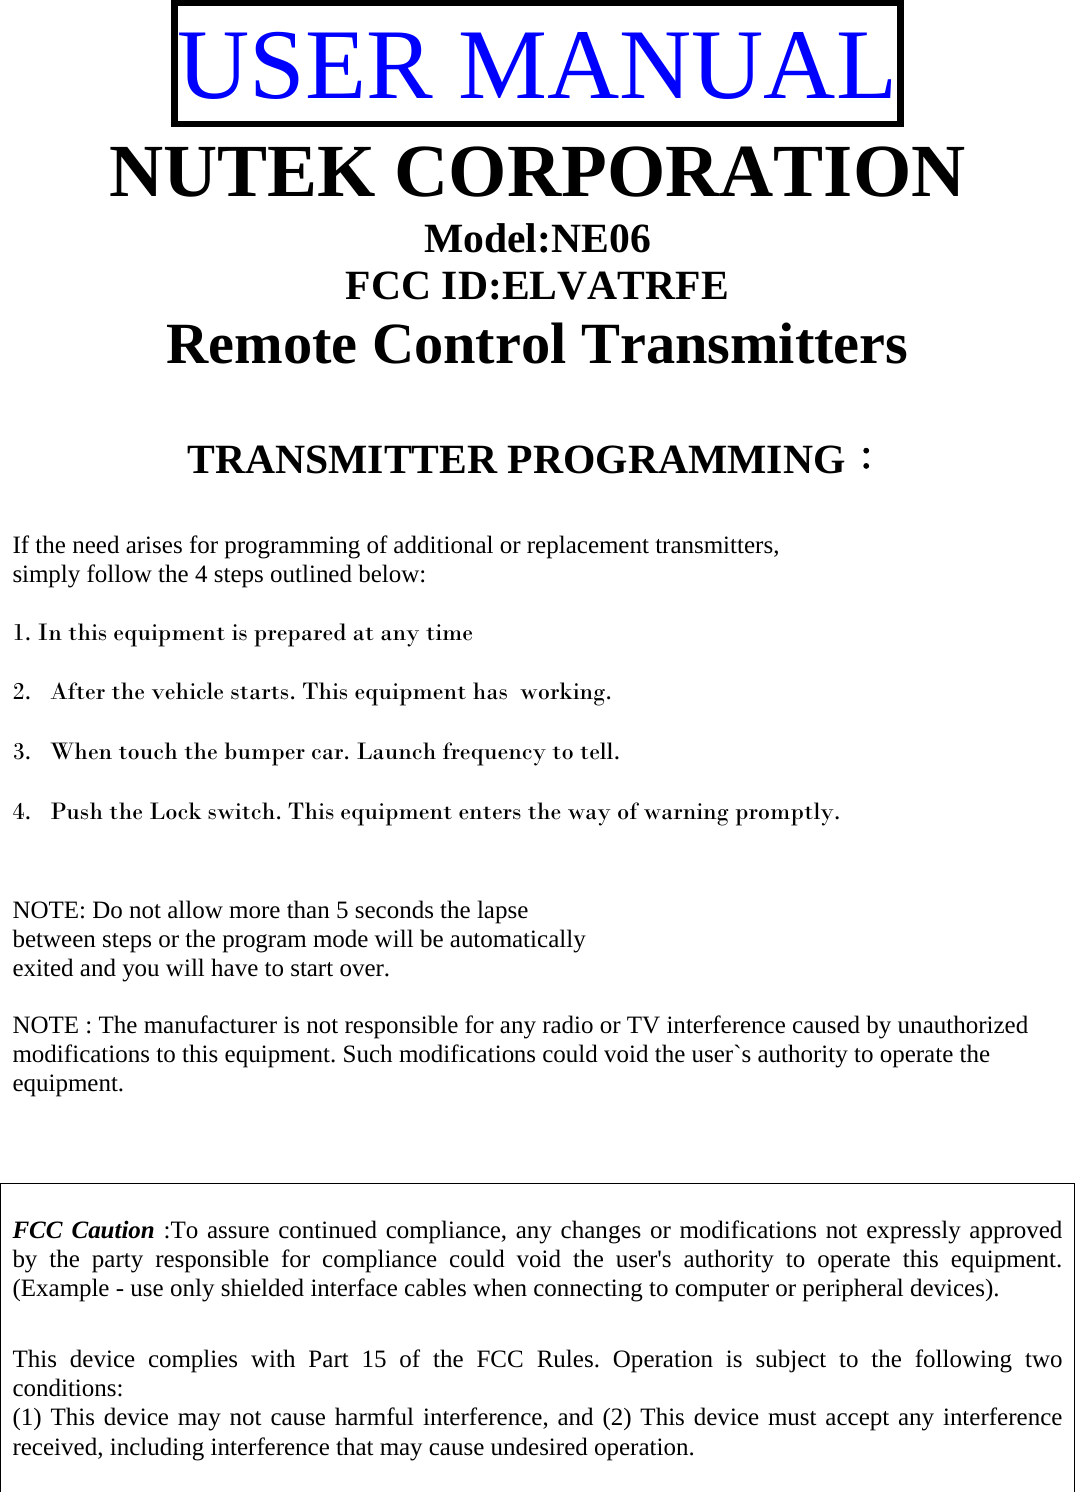 USER MANUAL NUTEK CORPORATION Model:NE06 FCC ID:ELVATRFE Remote Control Transmitters   TRANSMITTER PROGRAMMING：  If the need arises for programming of additional or replacement transmitters, simply follow the 4 steps outlined below:  1. In this equipment is prepared at any time   2. After the vehicle starts. This equipment has  working.   3. When touch the bumper car. Launch frequency to tell.   4. Push the Lock switch. This equipment enters the way of warning promptly.    NOTE: Do not allow more than 5 seconds the lapse  between steps or the program mode will be automatically  exited and you will have to start over.  NOTE : The manufacturer is not responsible for any radio or TV interference caused by unauthorized modifications to this equipment. Such modifications could void the user`s authority to operate the equipment.    FCC Caution :To assure continued compliance, any changes or modifications not expressly approved by the party responsible for compliance could void the user&apos;s authority to operate this equipment. (Example - use only shielded interface cables when connecting to computer or peripheral devices).  This device complies with Part 15 of the FCC Rules. Operation is subject to the following two conditions: (1) This device may not cause harmful interference, and (2) This device must accept any interference received, including interference that may cause undesired operation.  